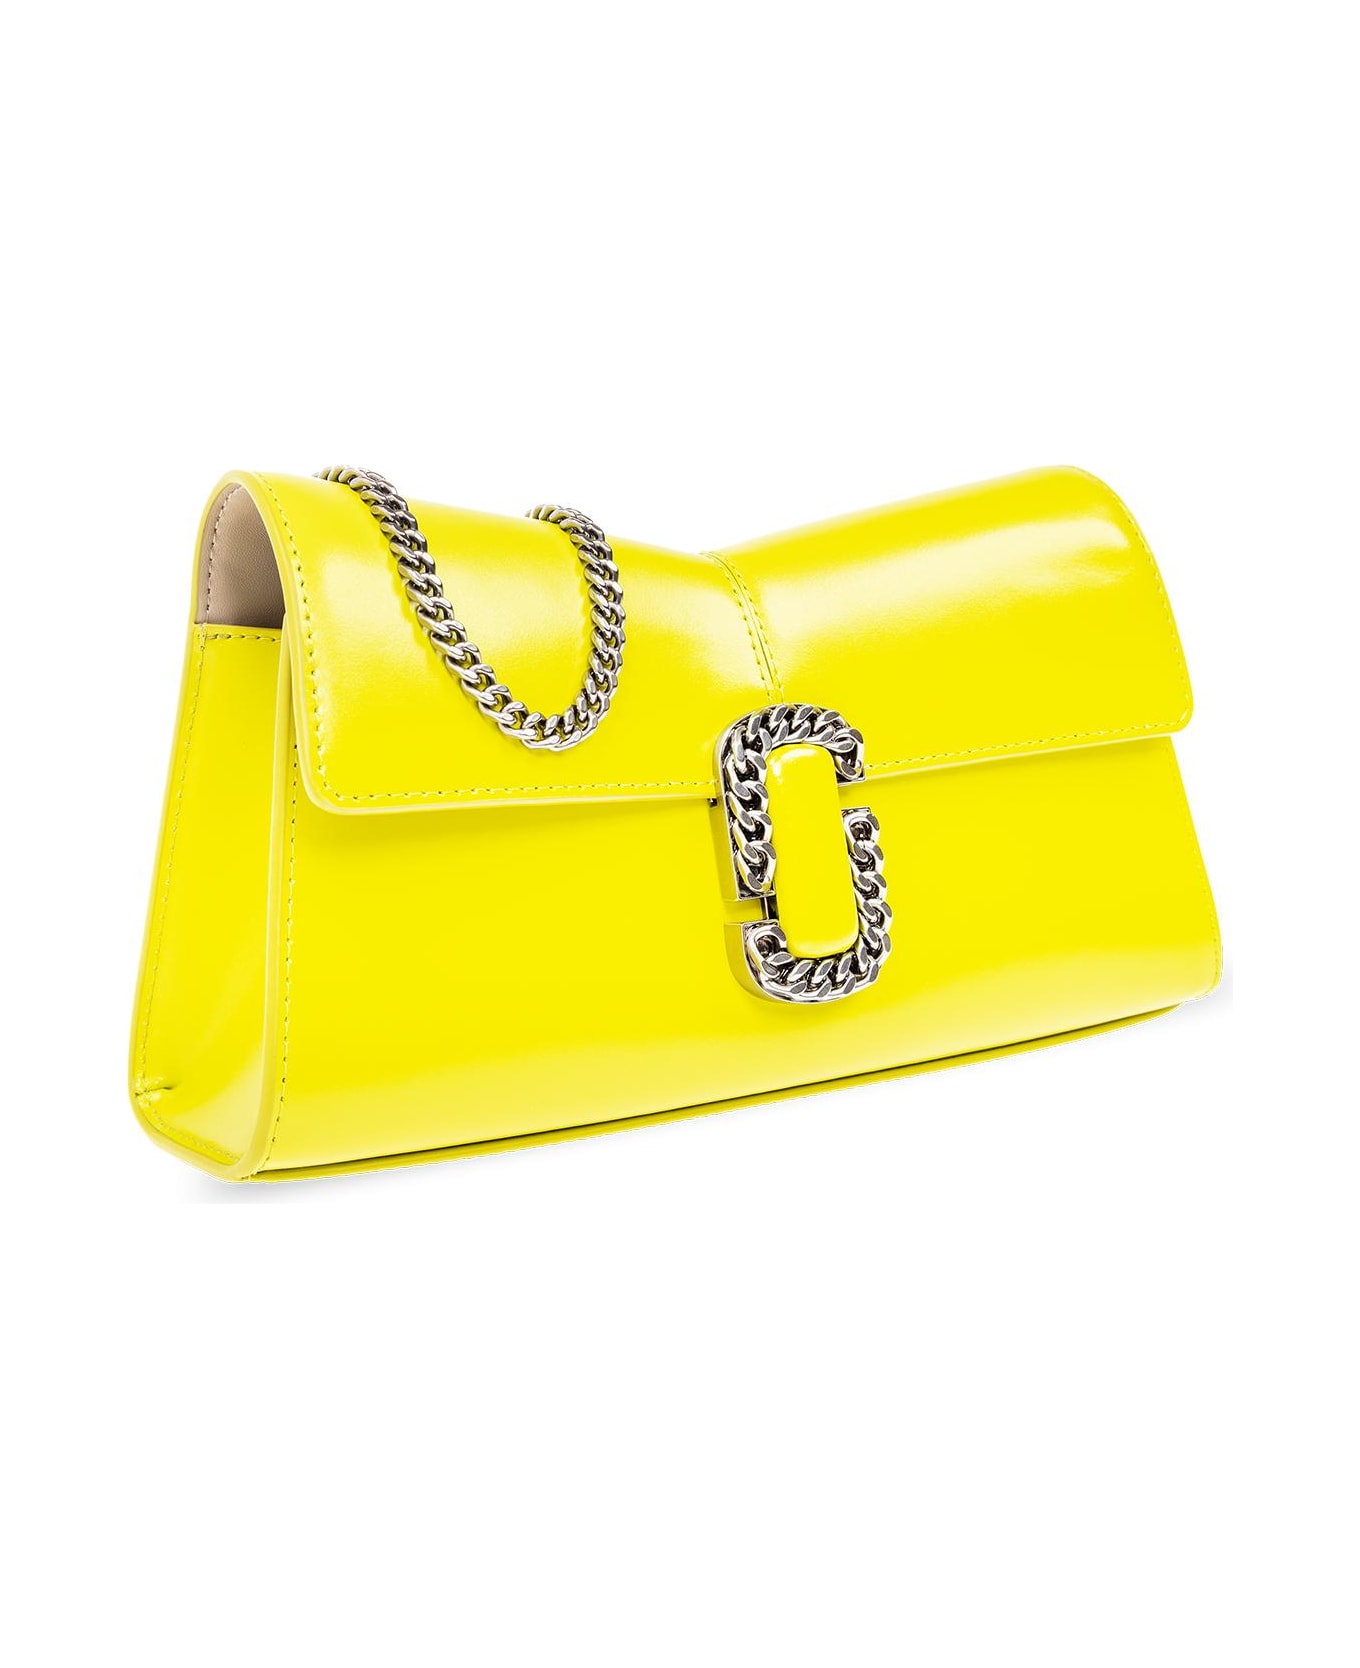 Marc Jacobs The St Marc Clutch Bag - ACID LIME クラッチバッグ